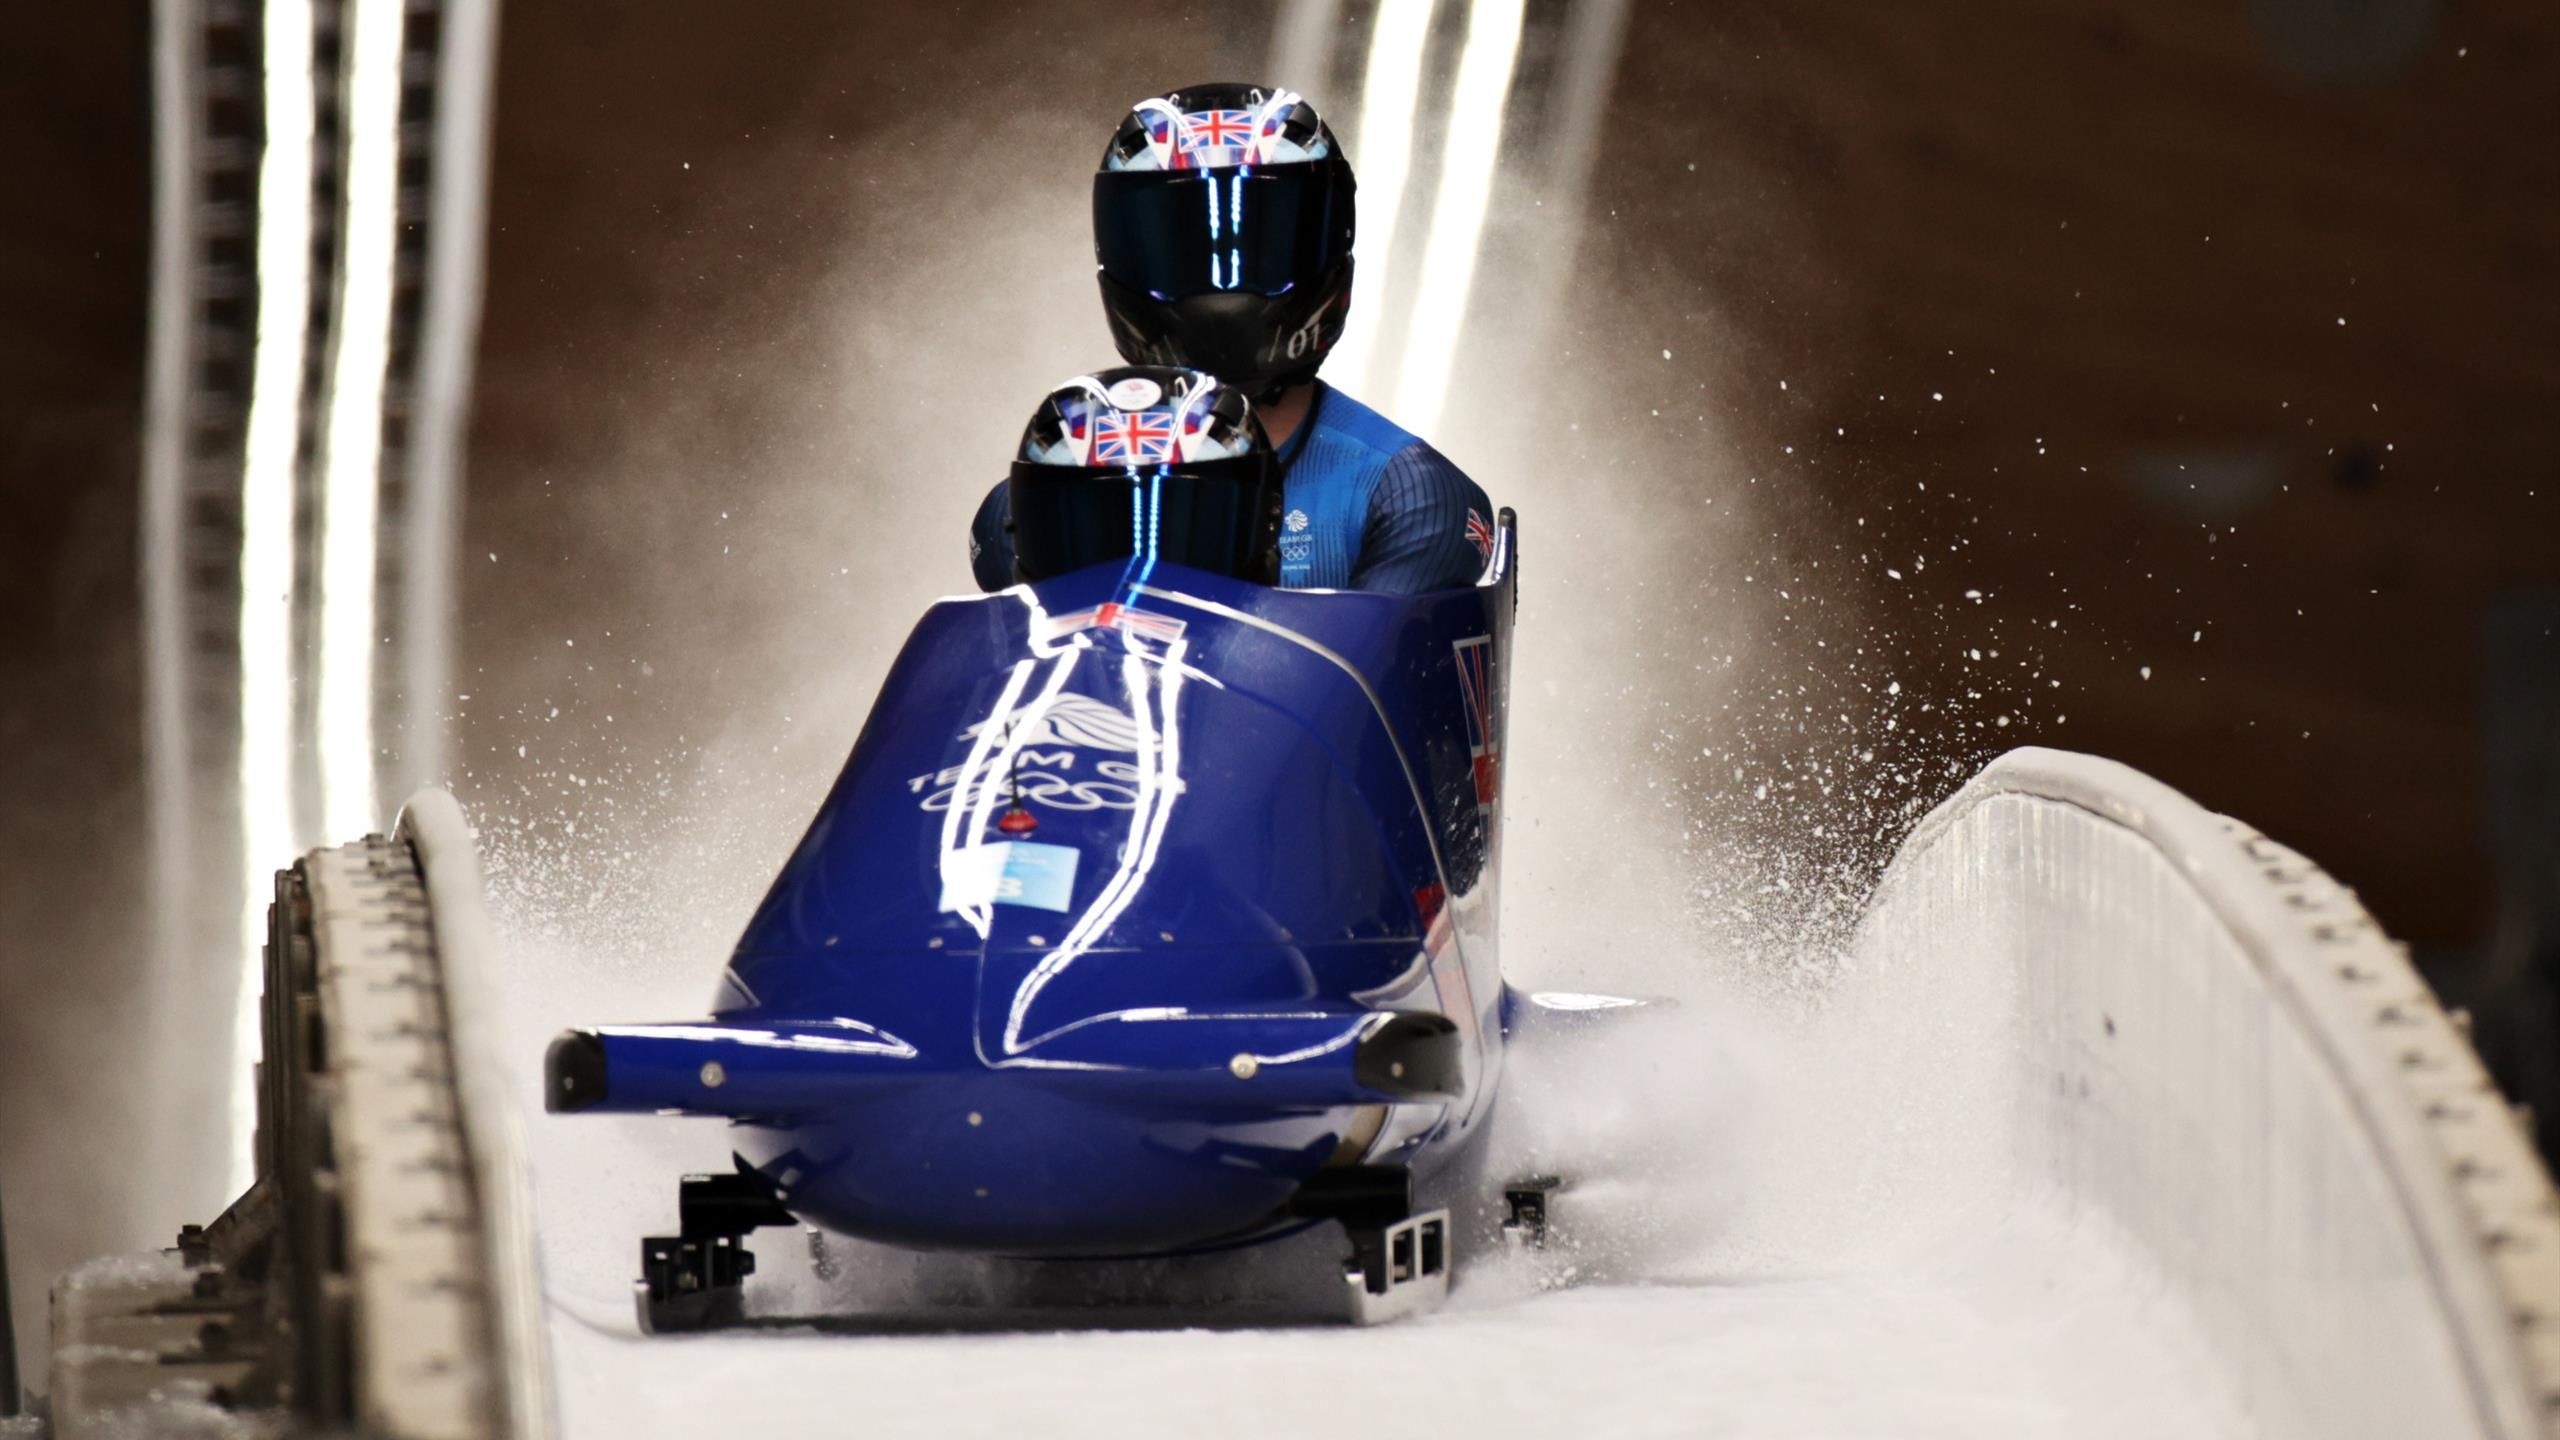 Winter Olympics 2022 - They have got a massive bucket of money - Team GB pair explain German bobsleigh dominance